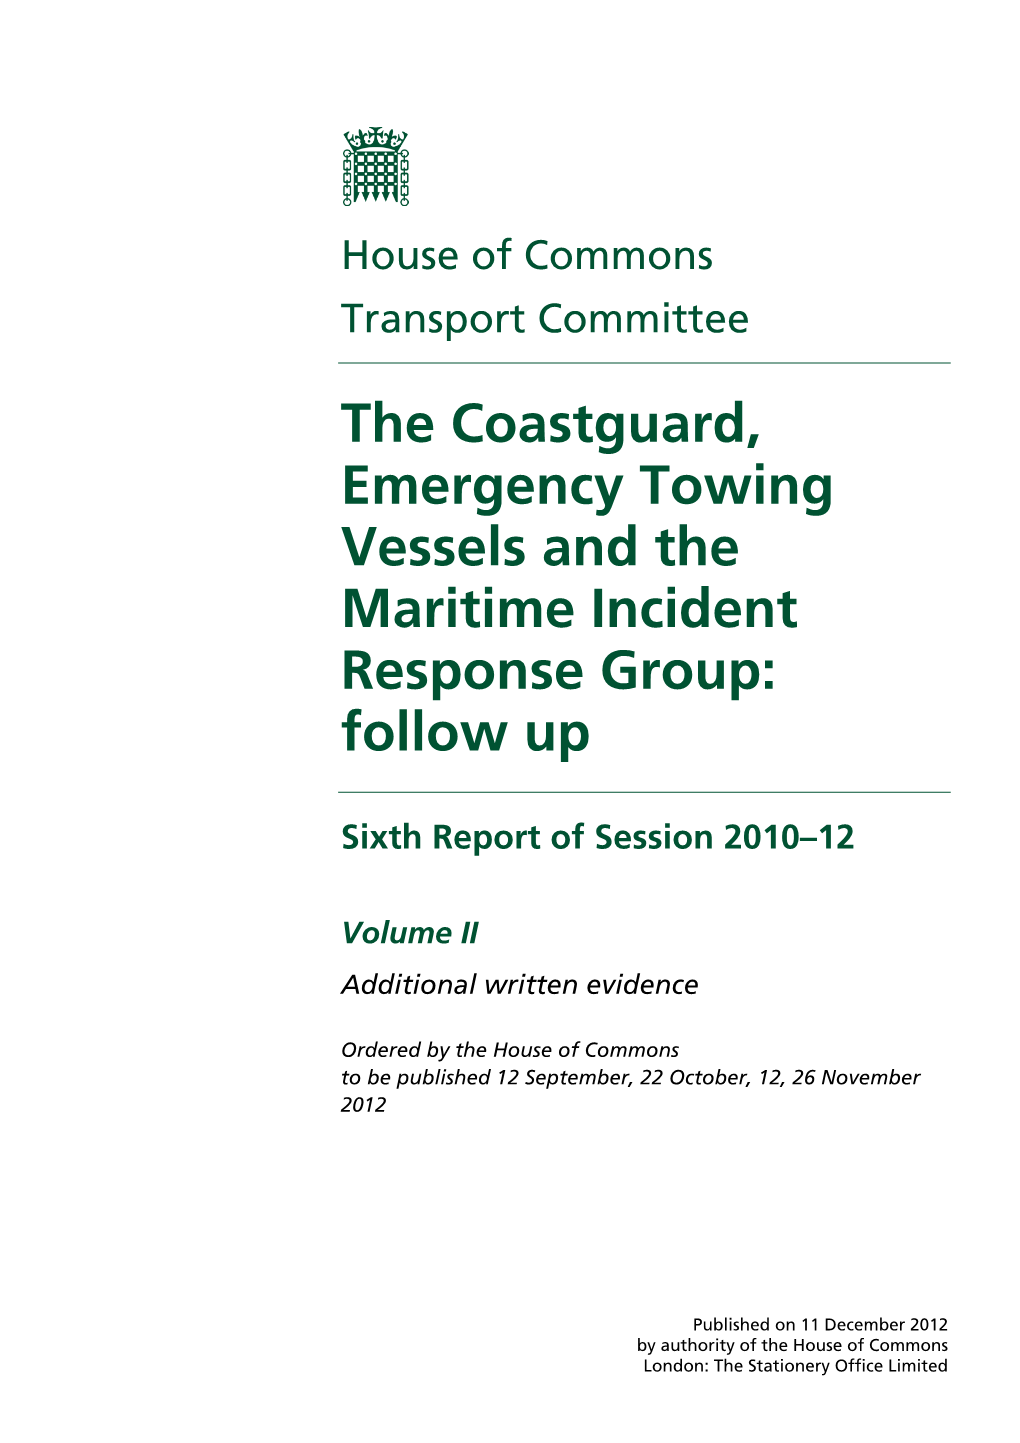 The Coastguard, Emergency Towing Vessels and the Maritime Incident Response Group: Follow Up